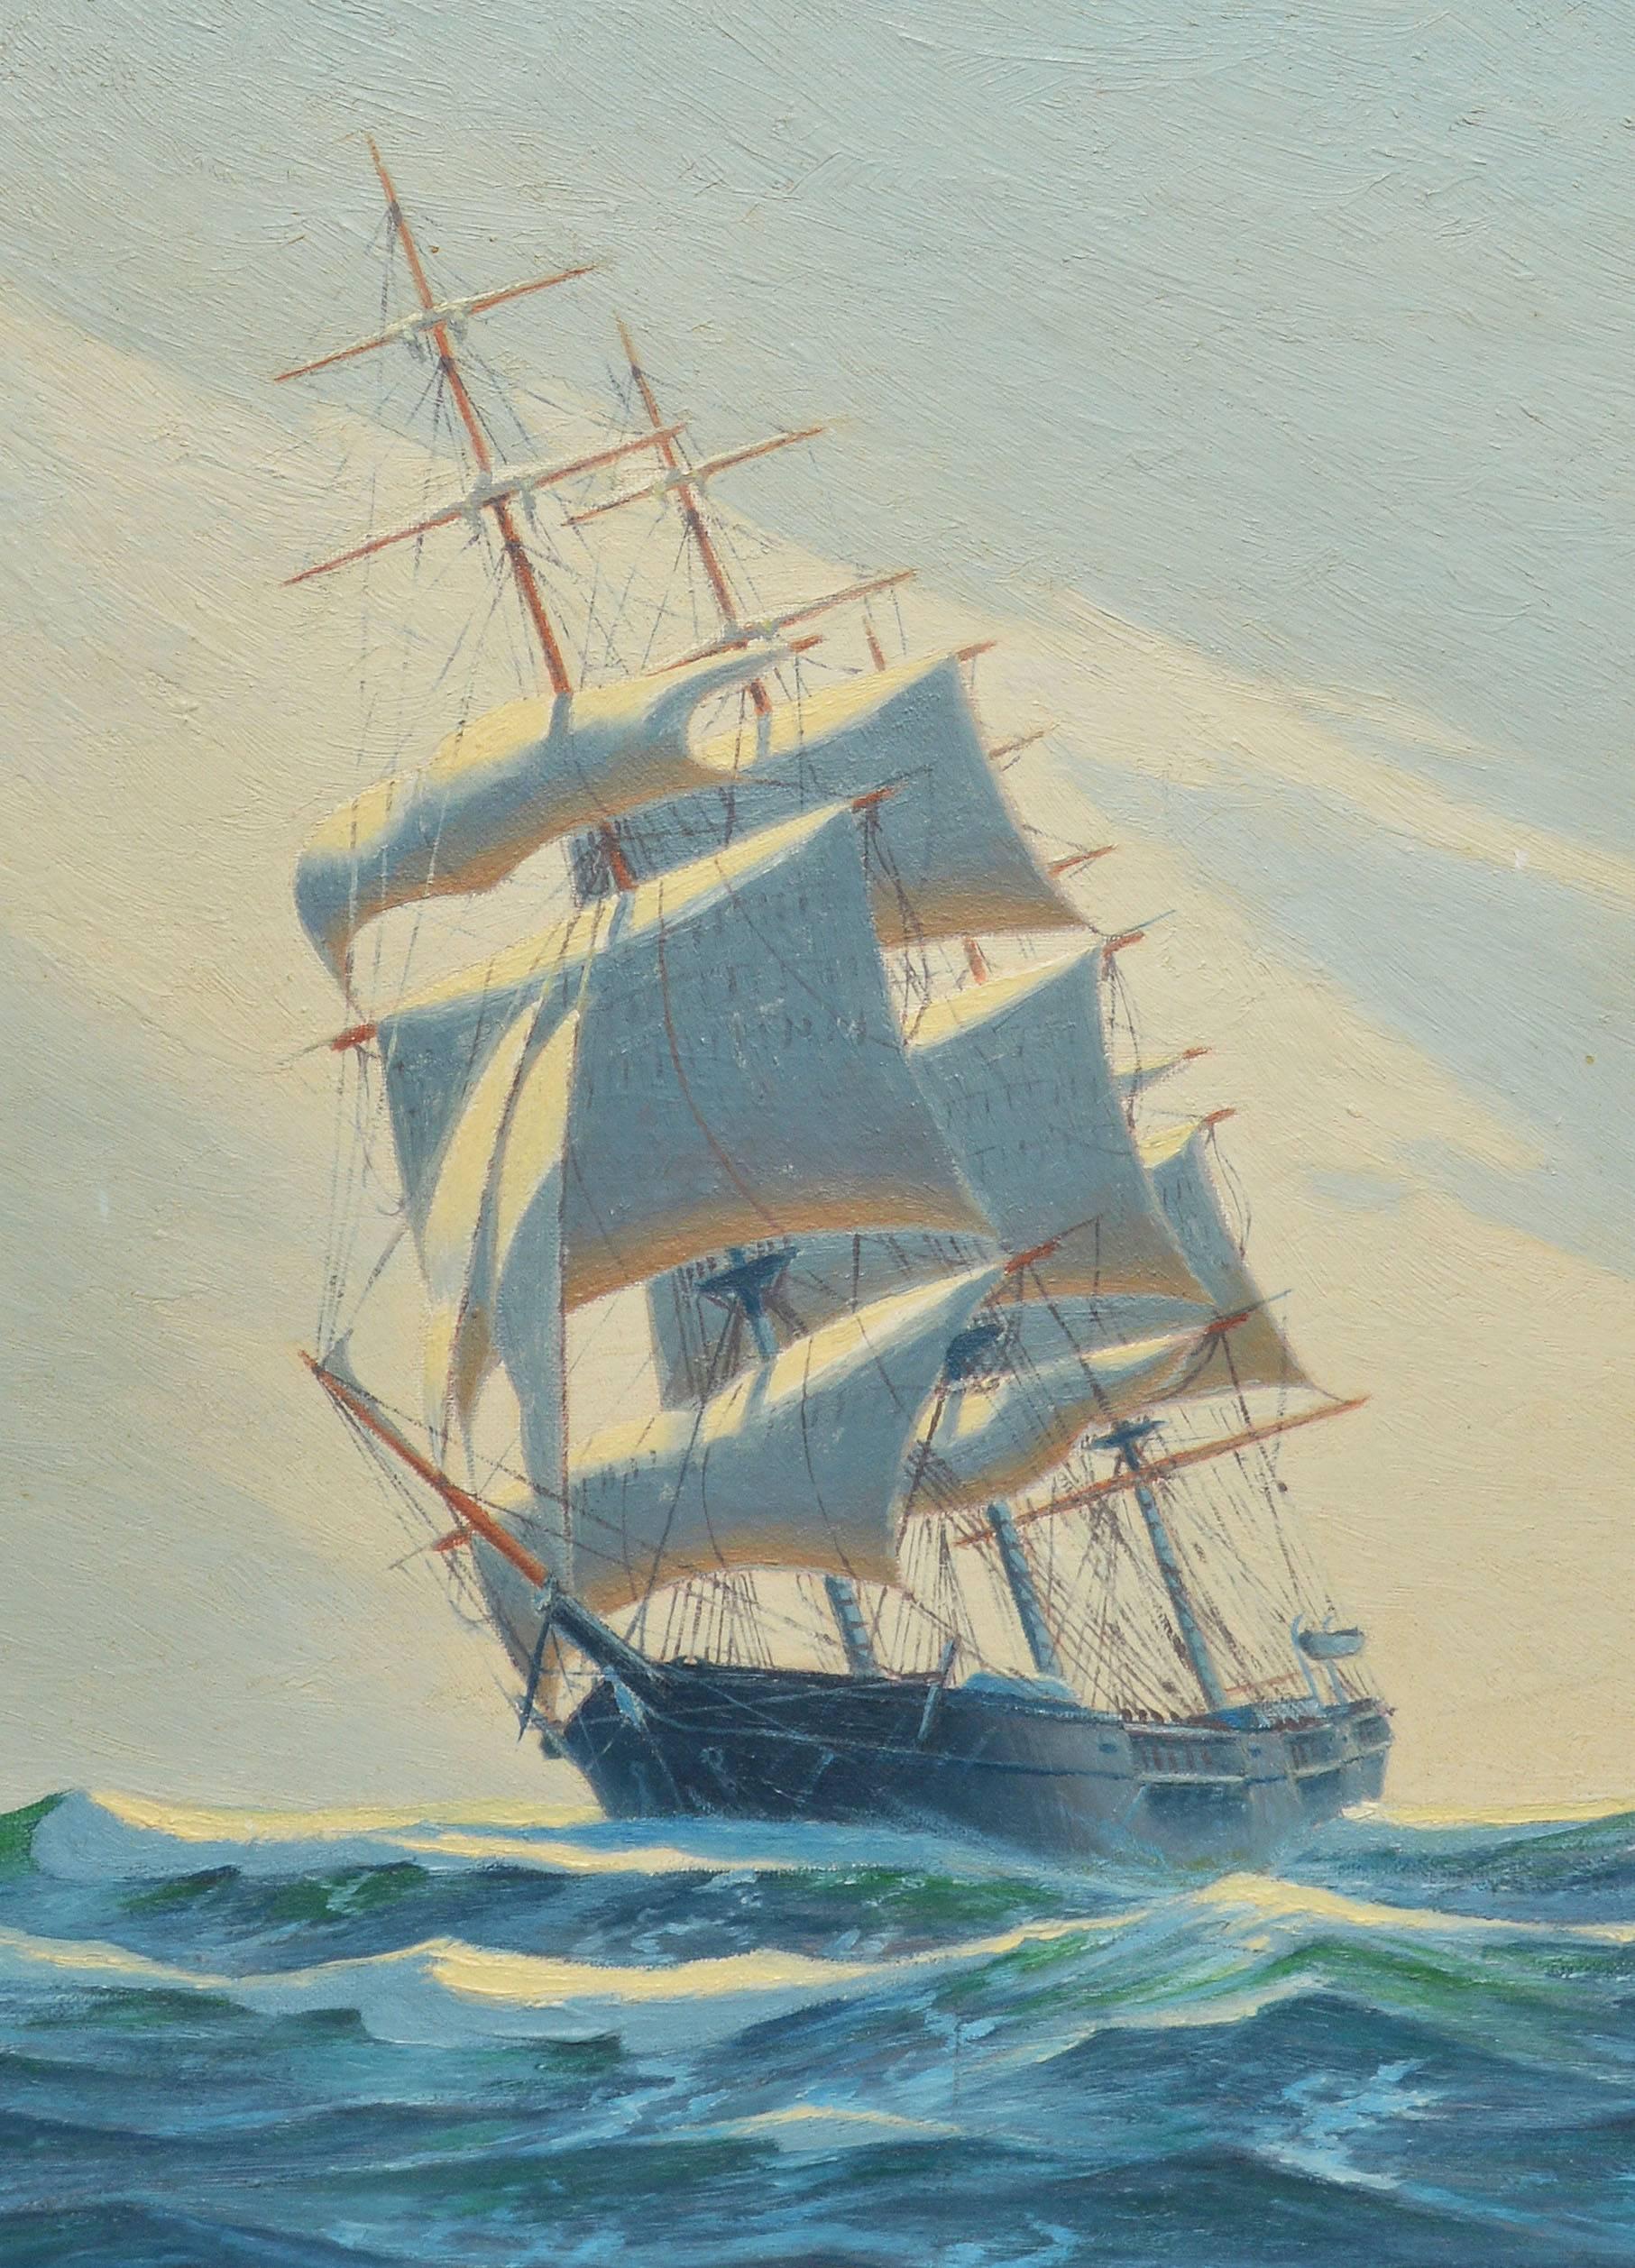 Impressionist view of a sailboat at sea by Henry Bernahl  (1900 - 1984).  Oil on board, circa 1930.  Signed lower left "Henry Bernahl".  Displayed in a giltwood frame.  Image size, 14"L x 18"H, overall 16"L x 20"H.